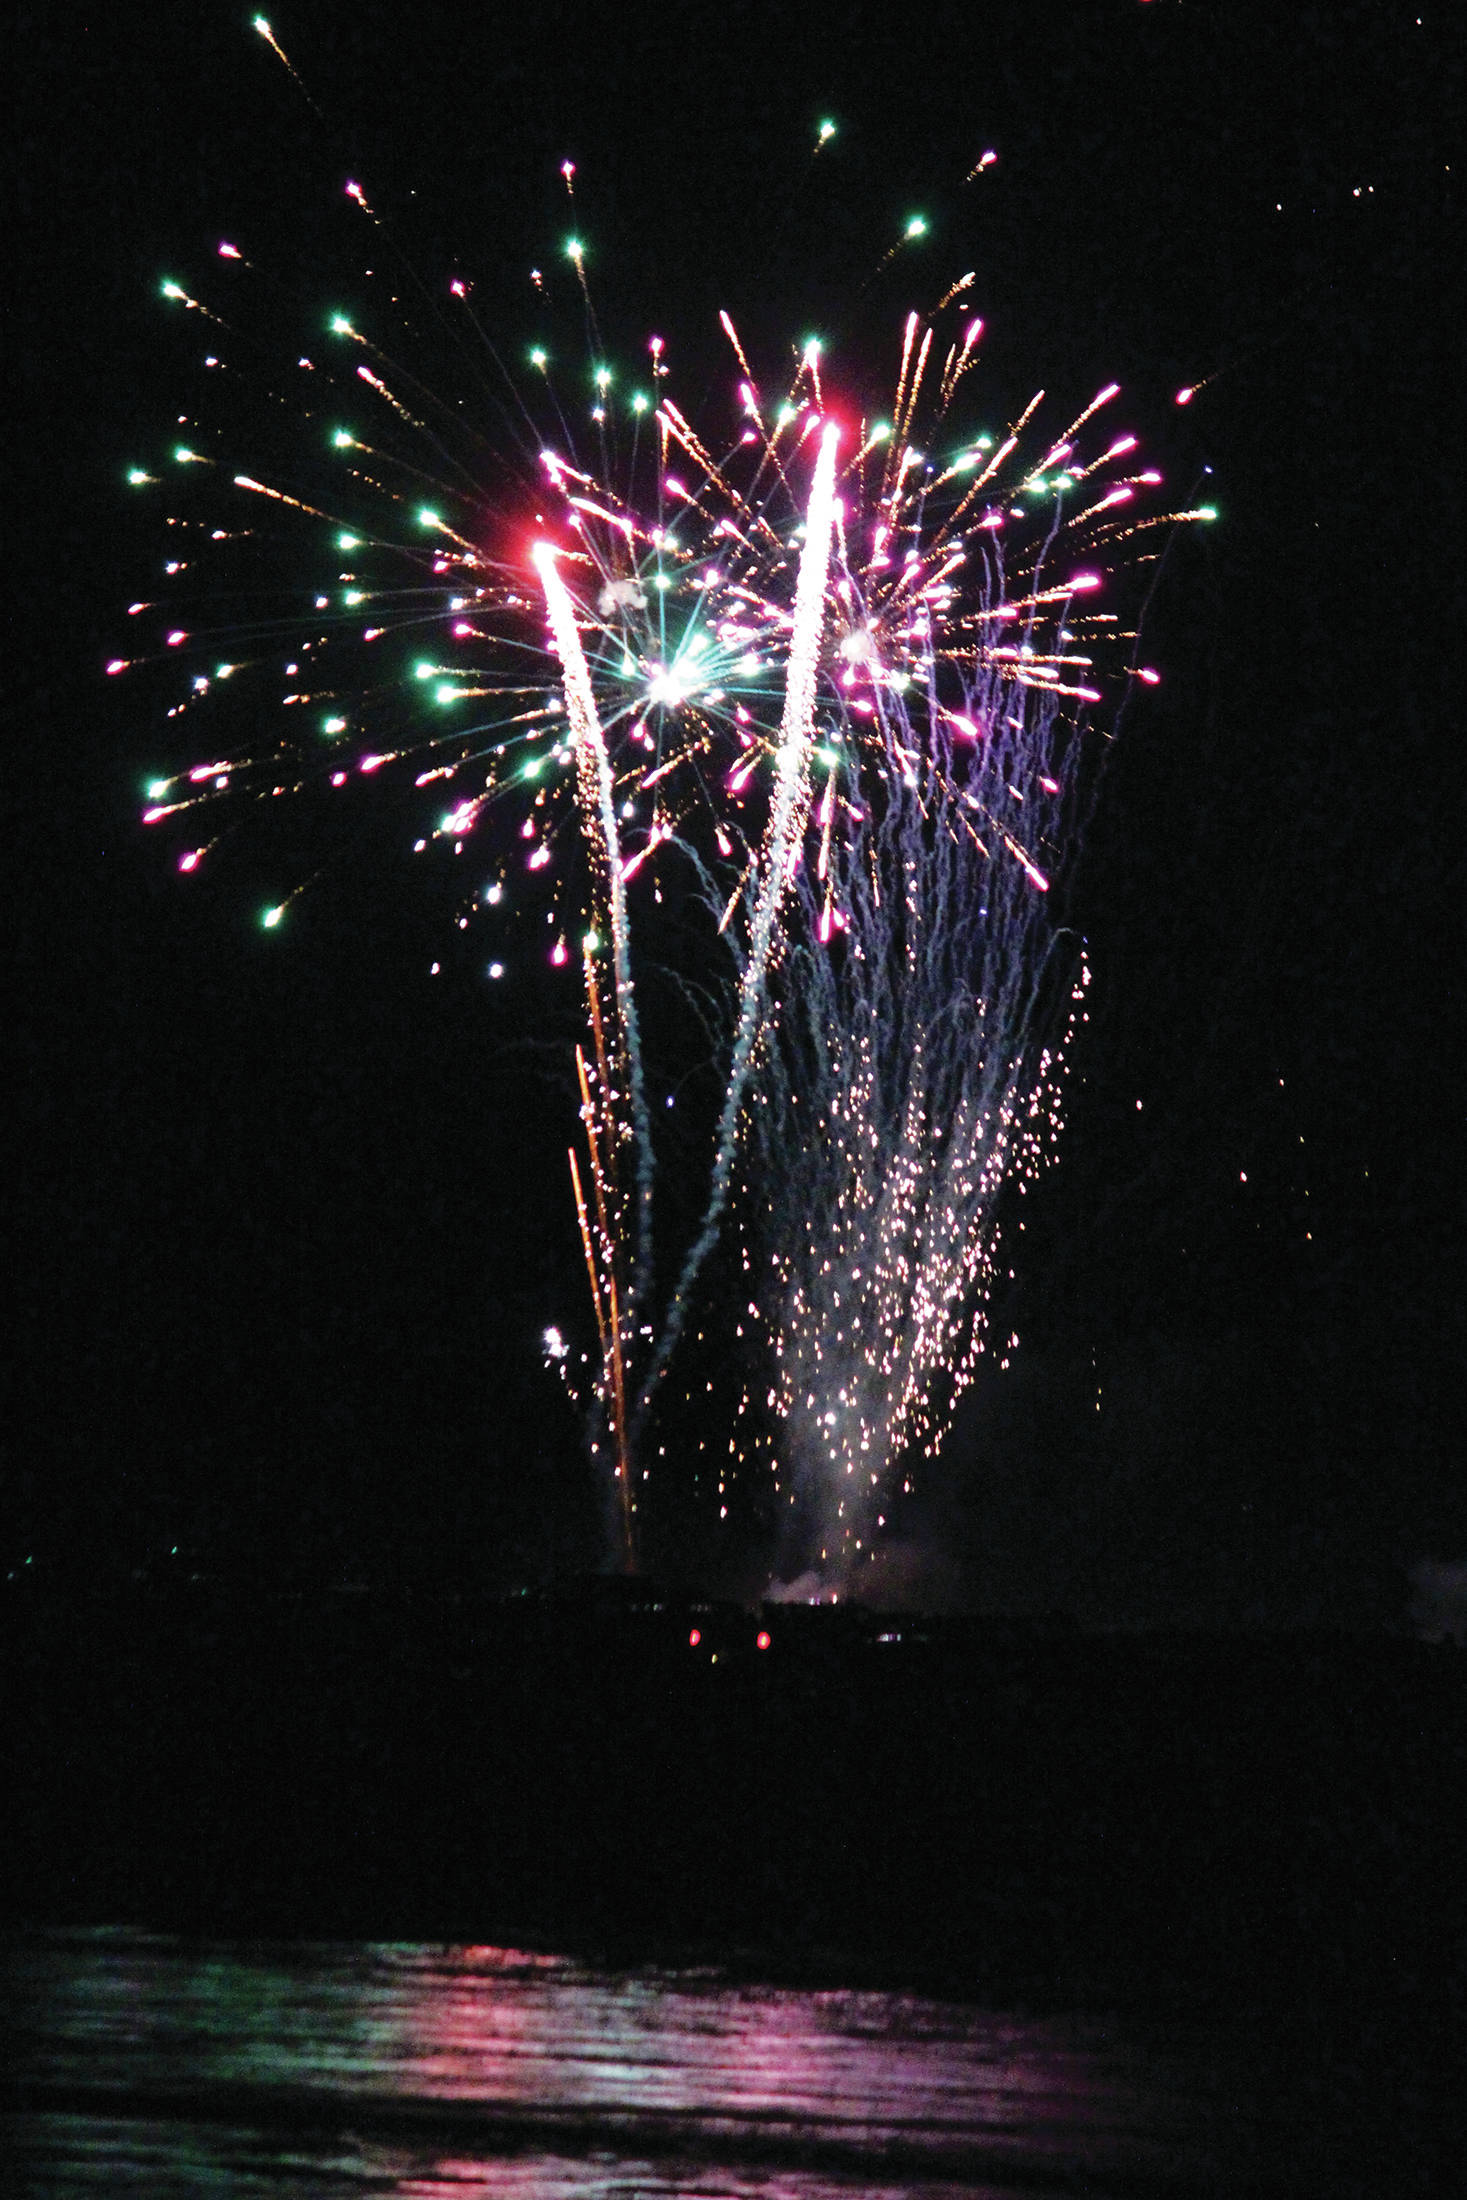 Fireworks explode above the Homer Spit on Dec. 31, 2020 as part of the third annual crowdfunded fireworks in Homer, Alaska. (Photo by Megan Pacer/Homer News)